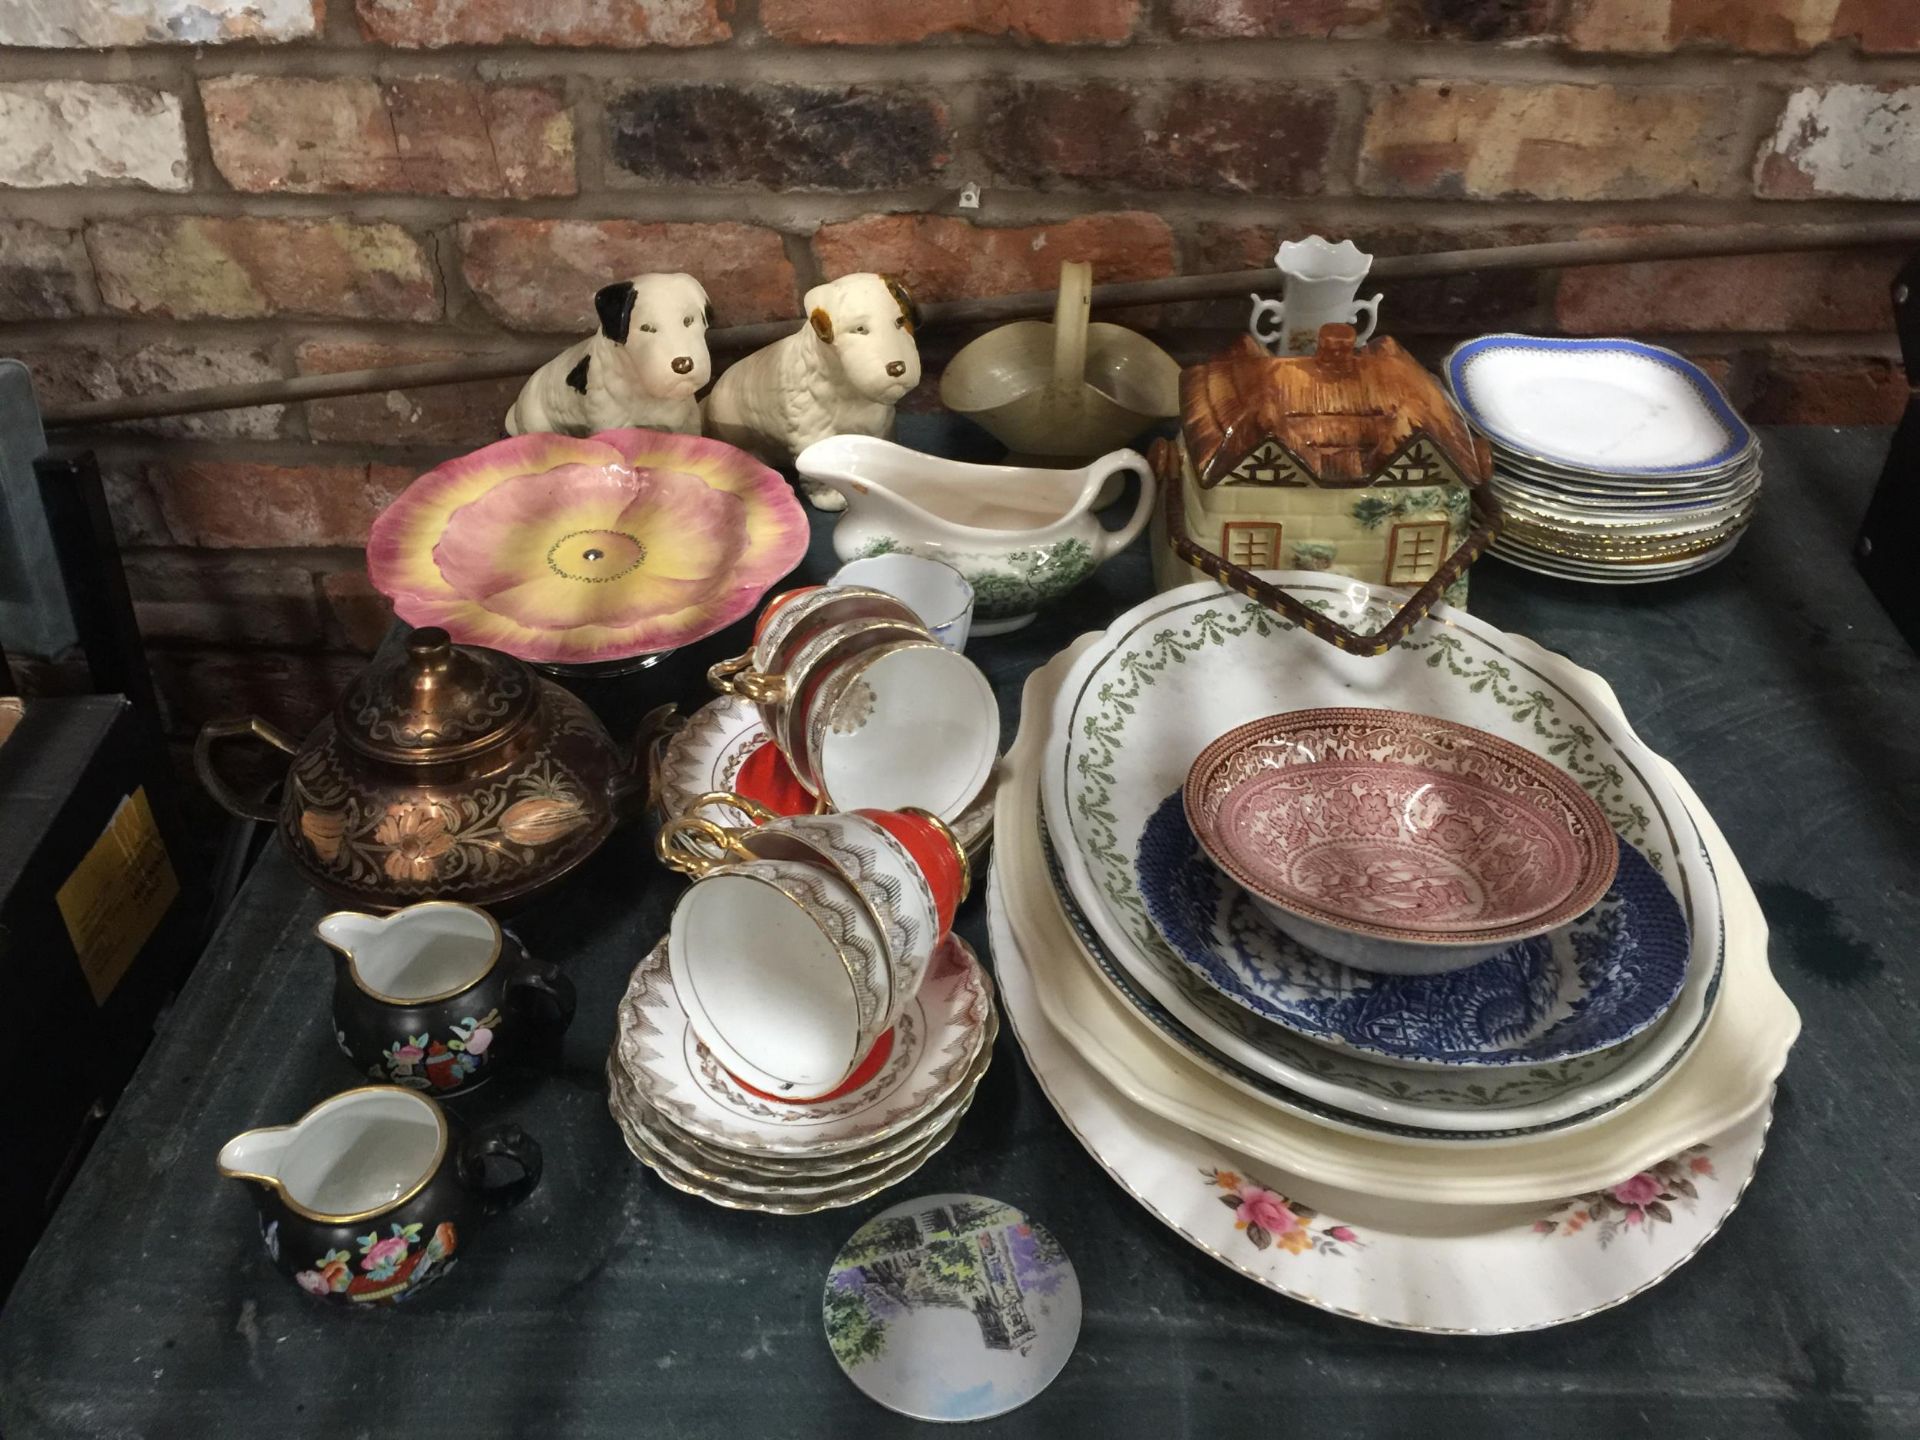 A MIXED GROUP OF CERAMICS - DOG FIGURES, ROYAL VENTON WARE CAKE STAND, COTTAGE WARE POT ETC